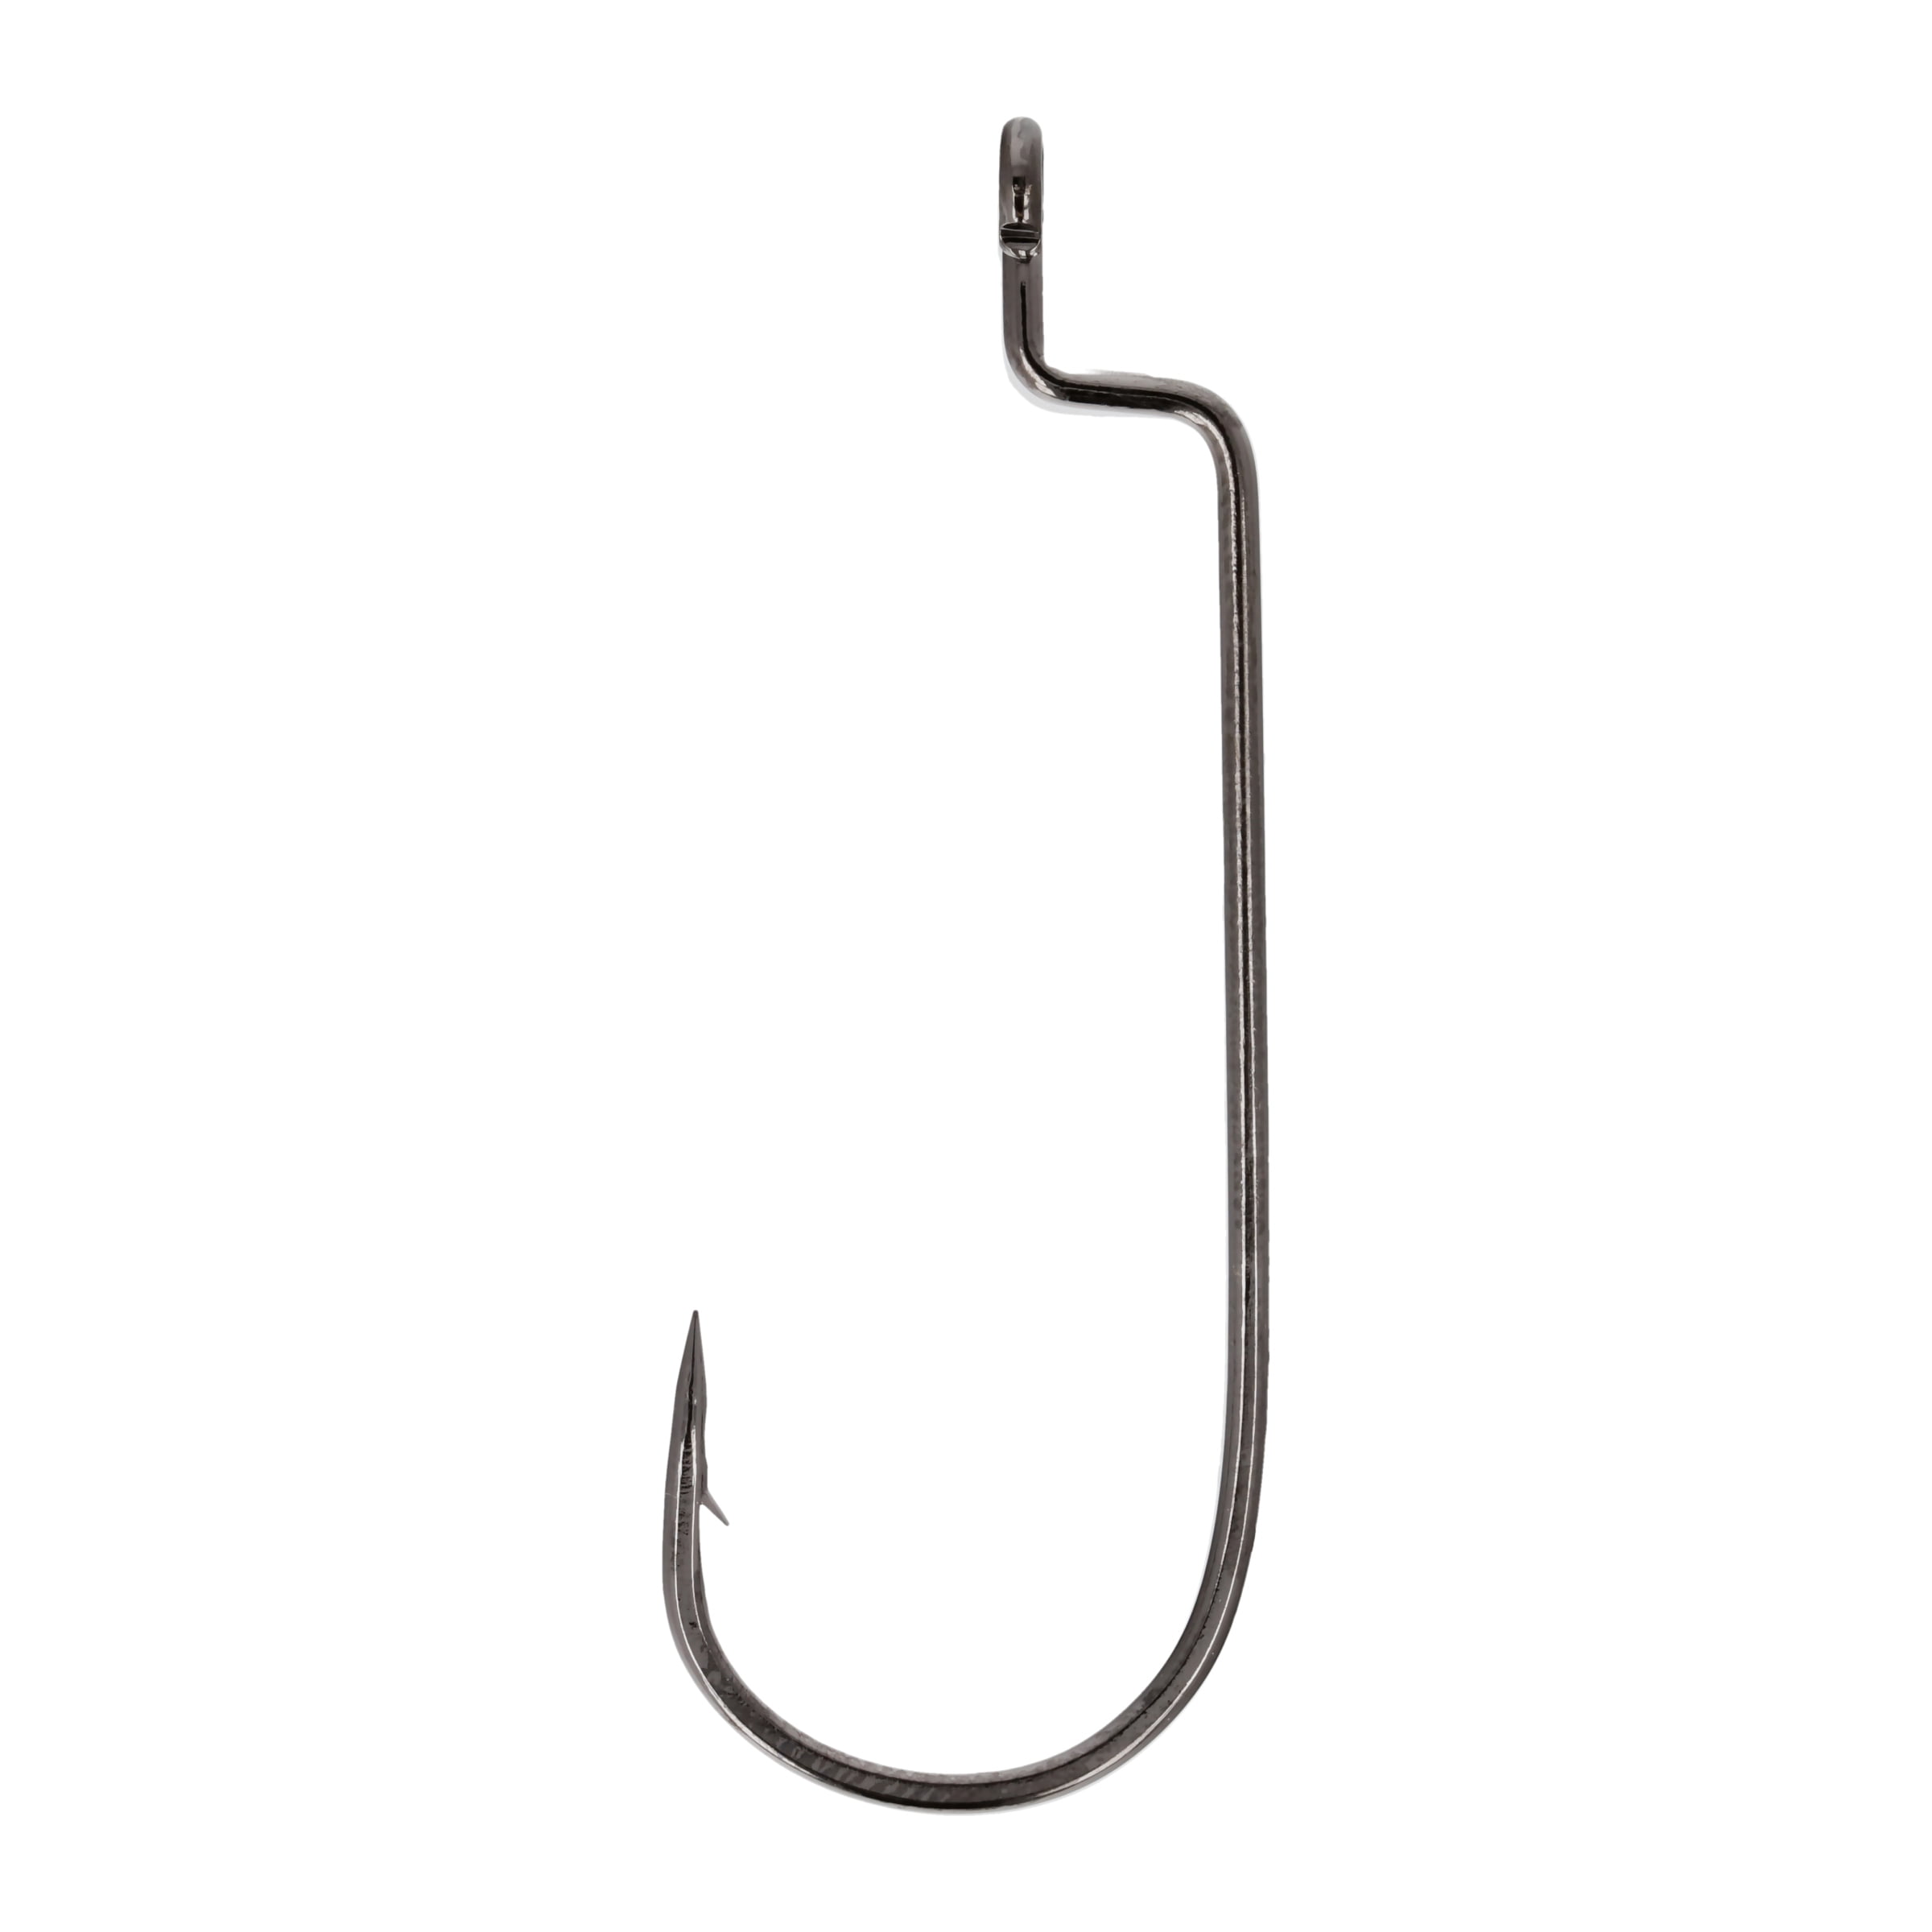 Eagle Claw Lazer Sharp Super Snell Freshwater 1/0 Fishing Hooks - 6 ct –  cssportinggoods